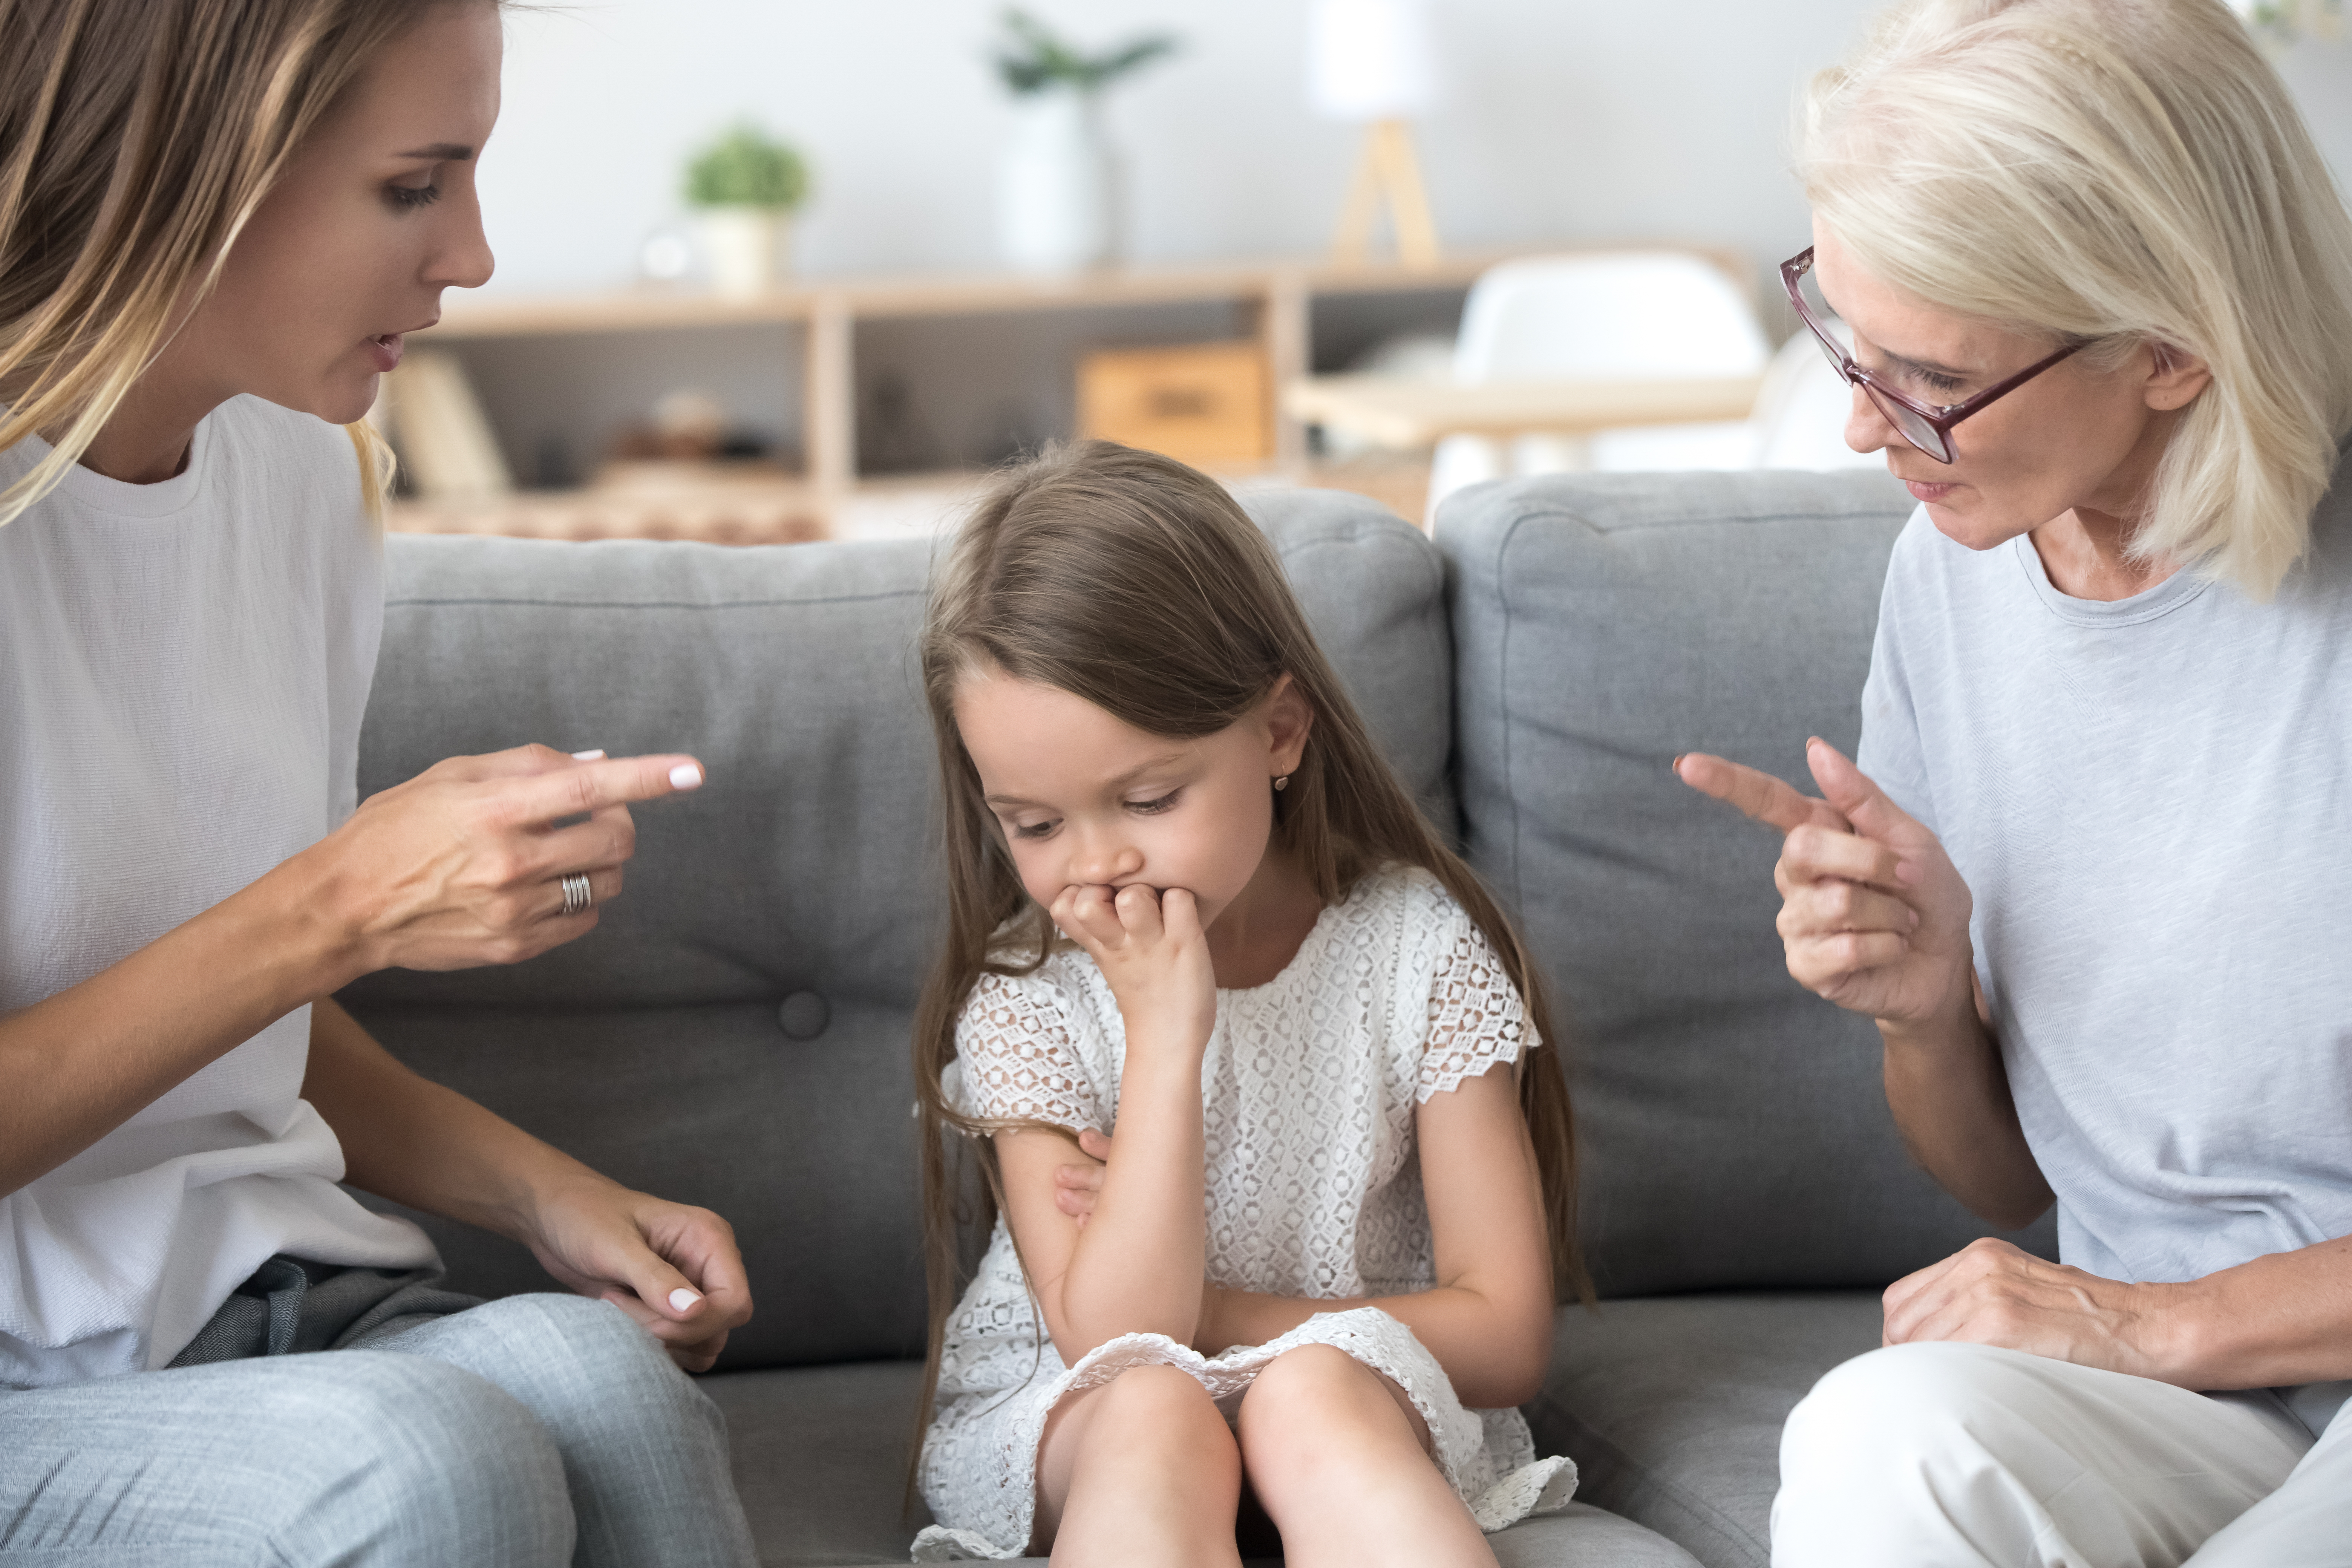 An angry young woman and an elderly lady lecturing a little girl | Source: Shutterstock